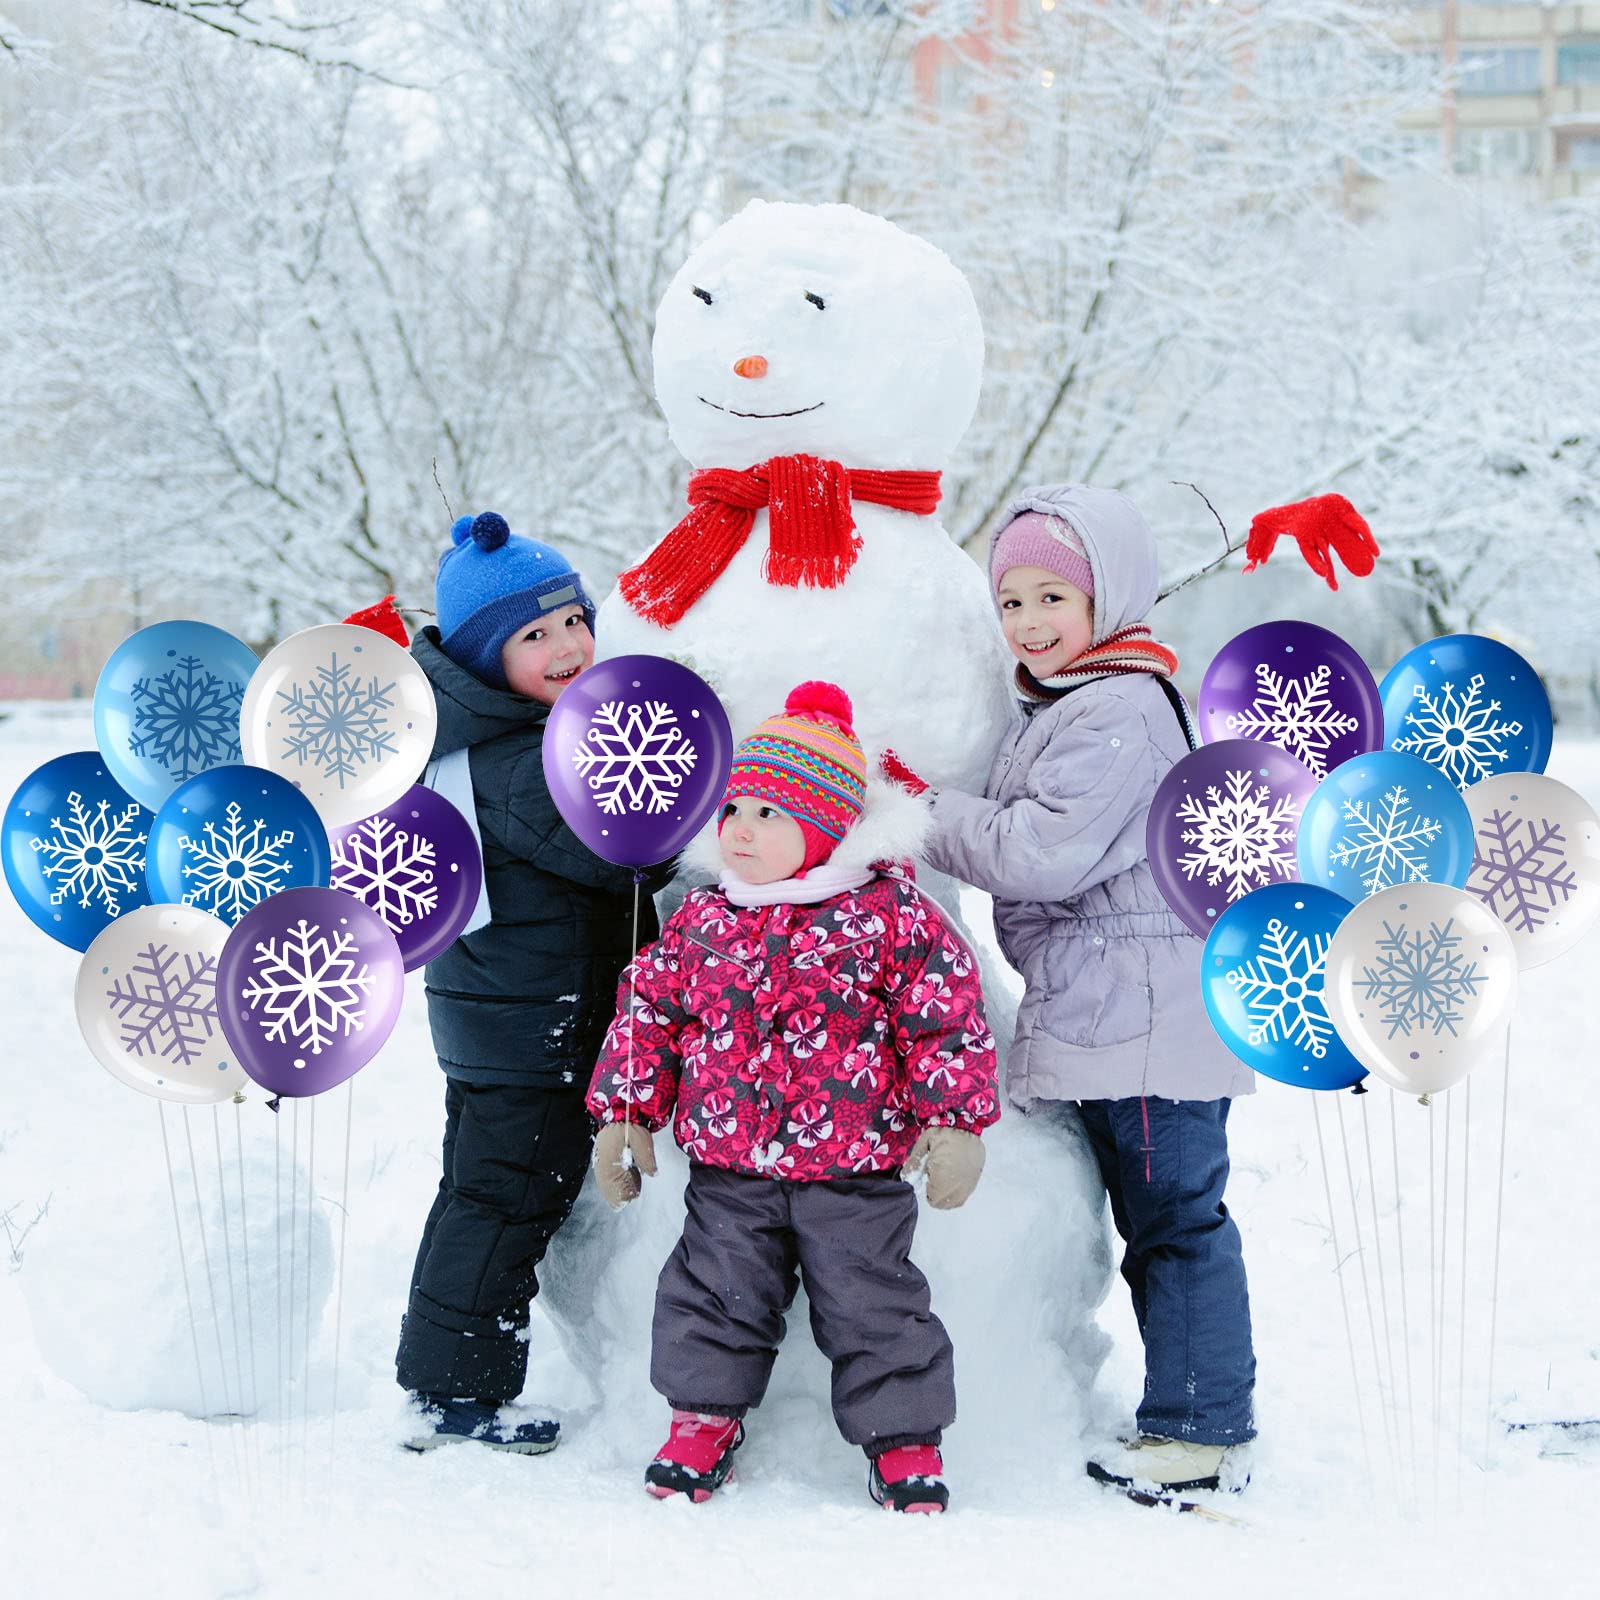 50 Counts Winter Snowflake Balloons 12 Inch Frozen Snowflake Balloons Wonderland Latex White Blue Purple Balloons for Christmas Holiday Wedding Baby Shower Party Decoration Home Supplies